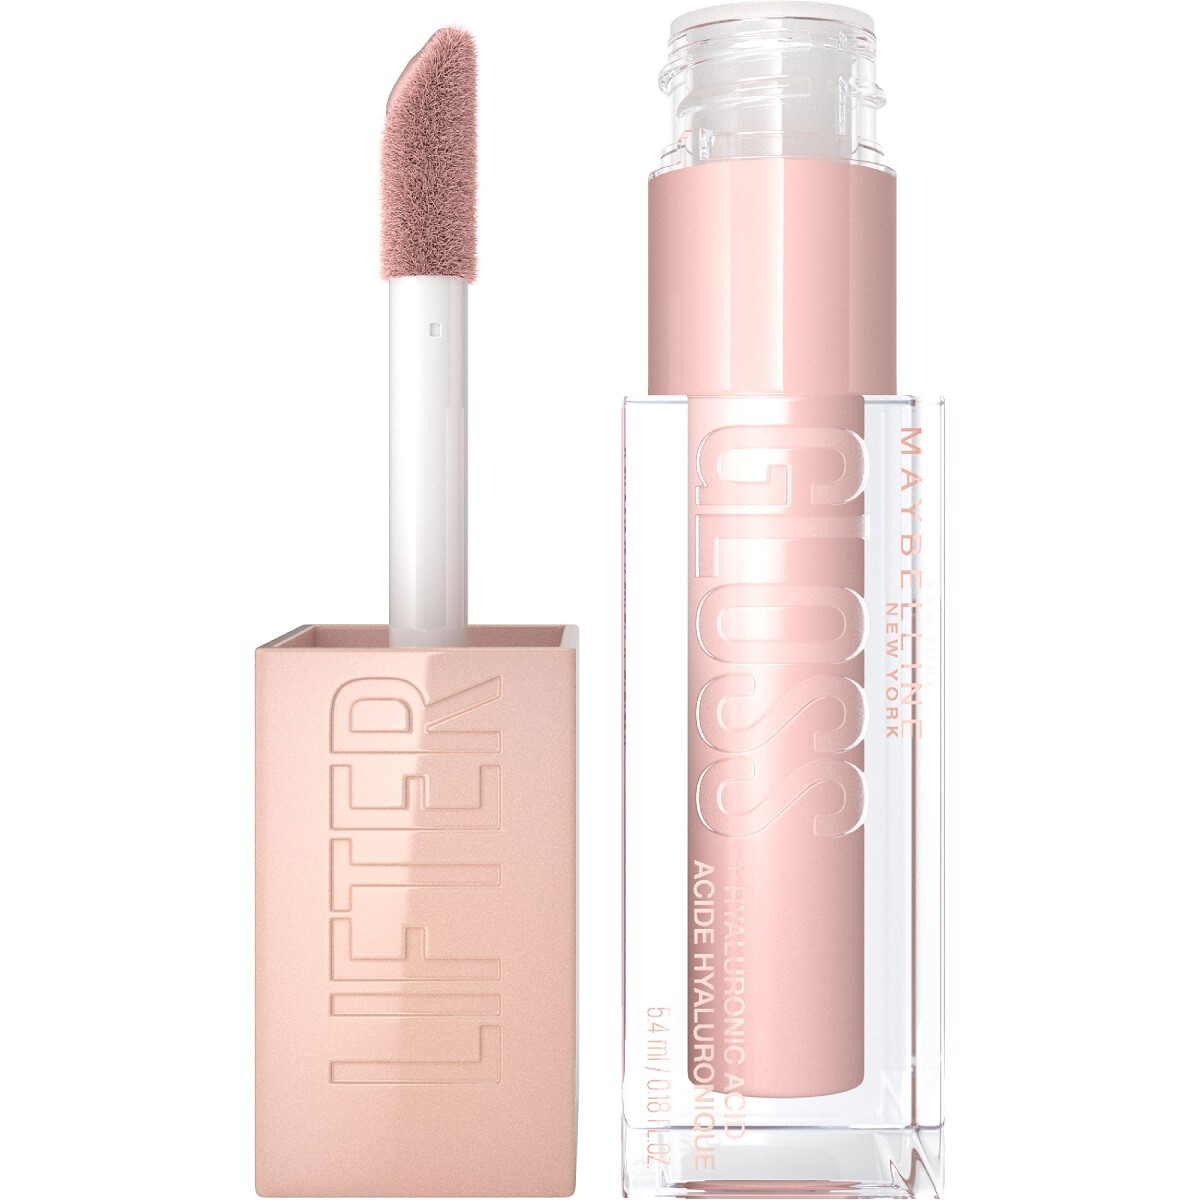 Labial Maybelline Lifter Gloss - Ice 